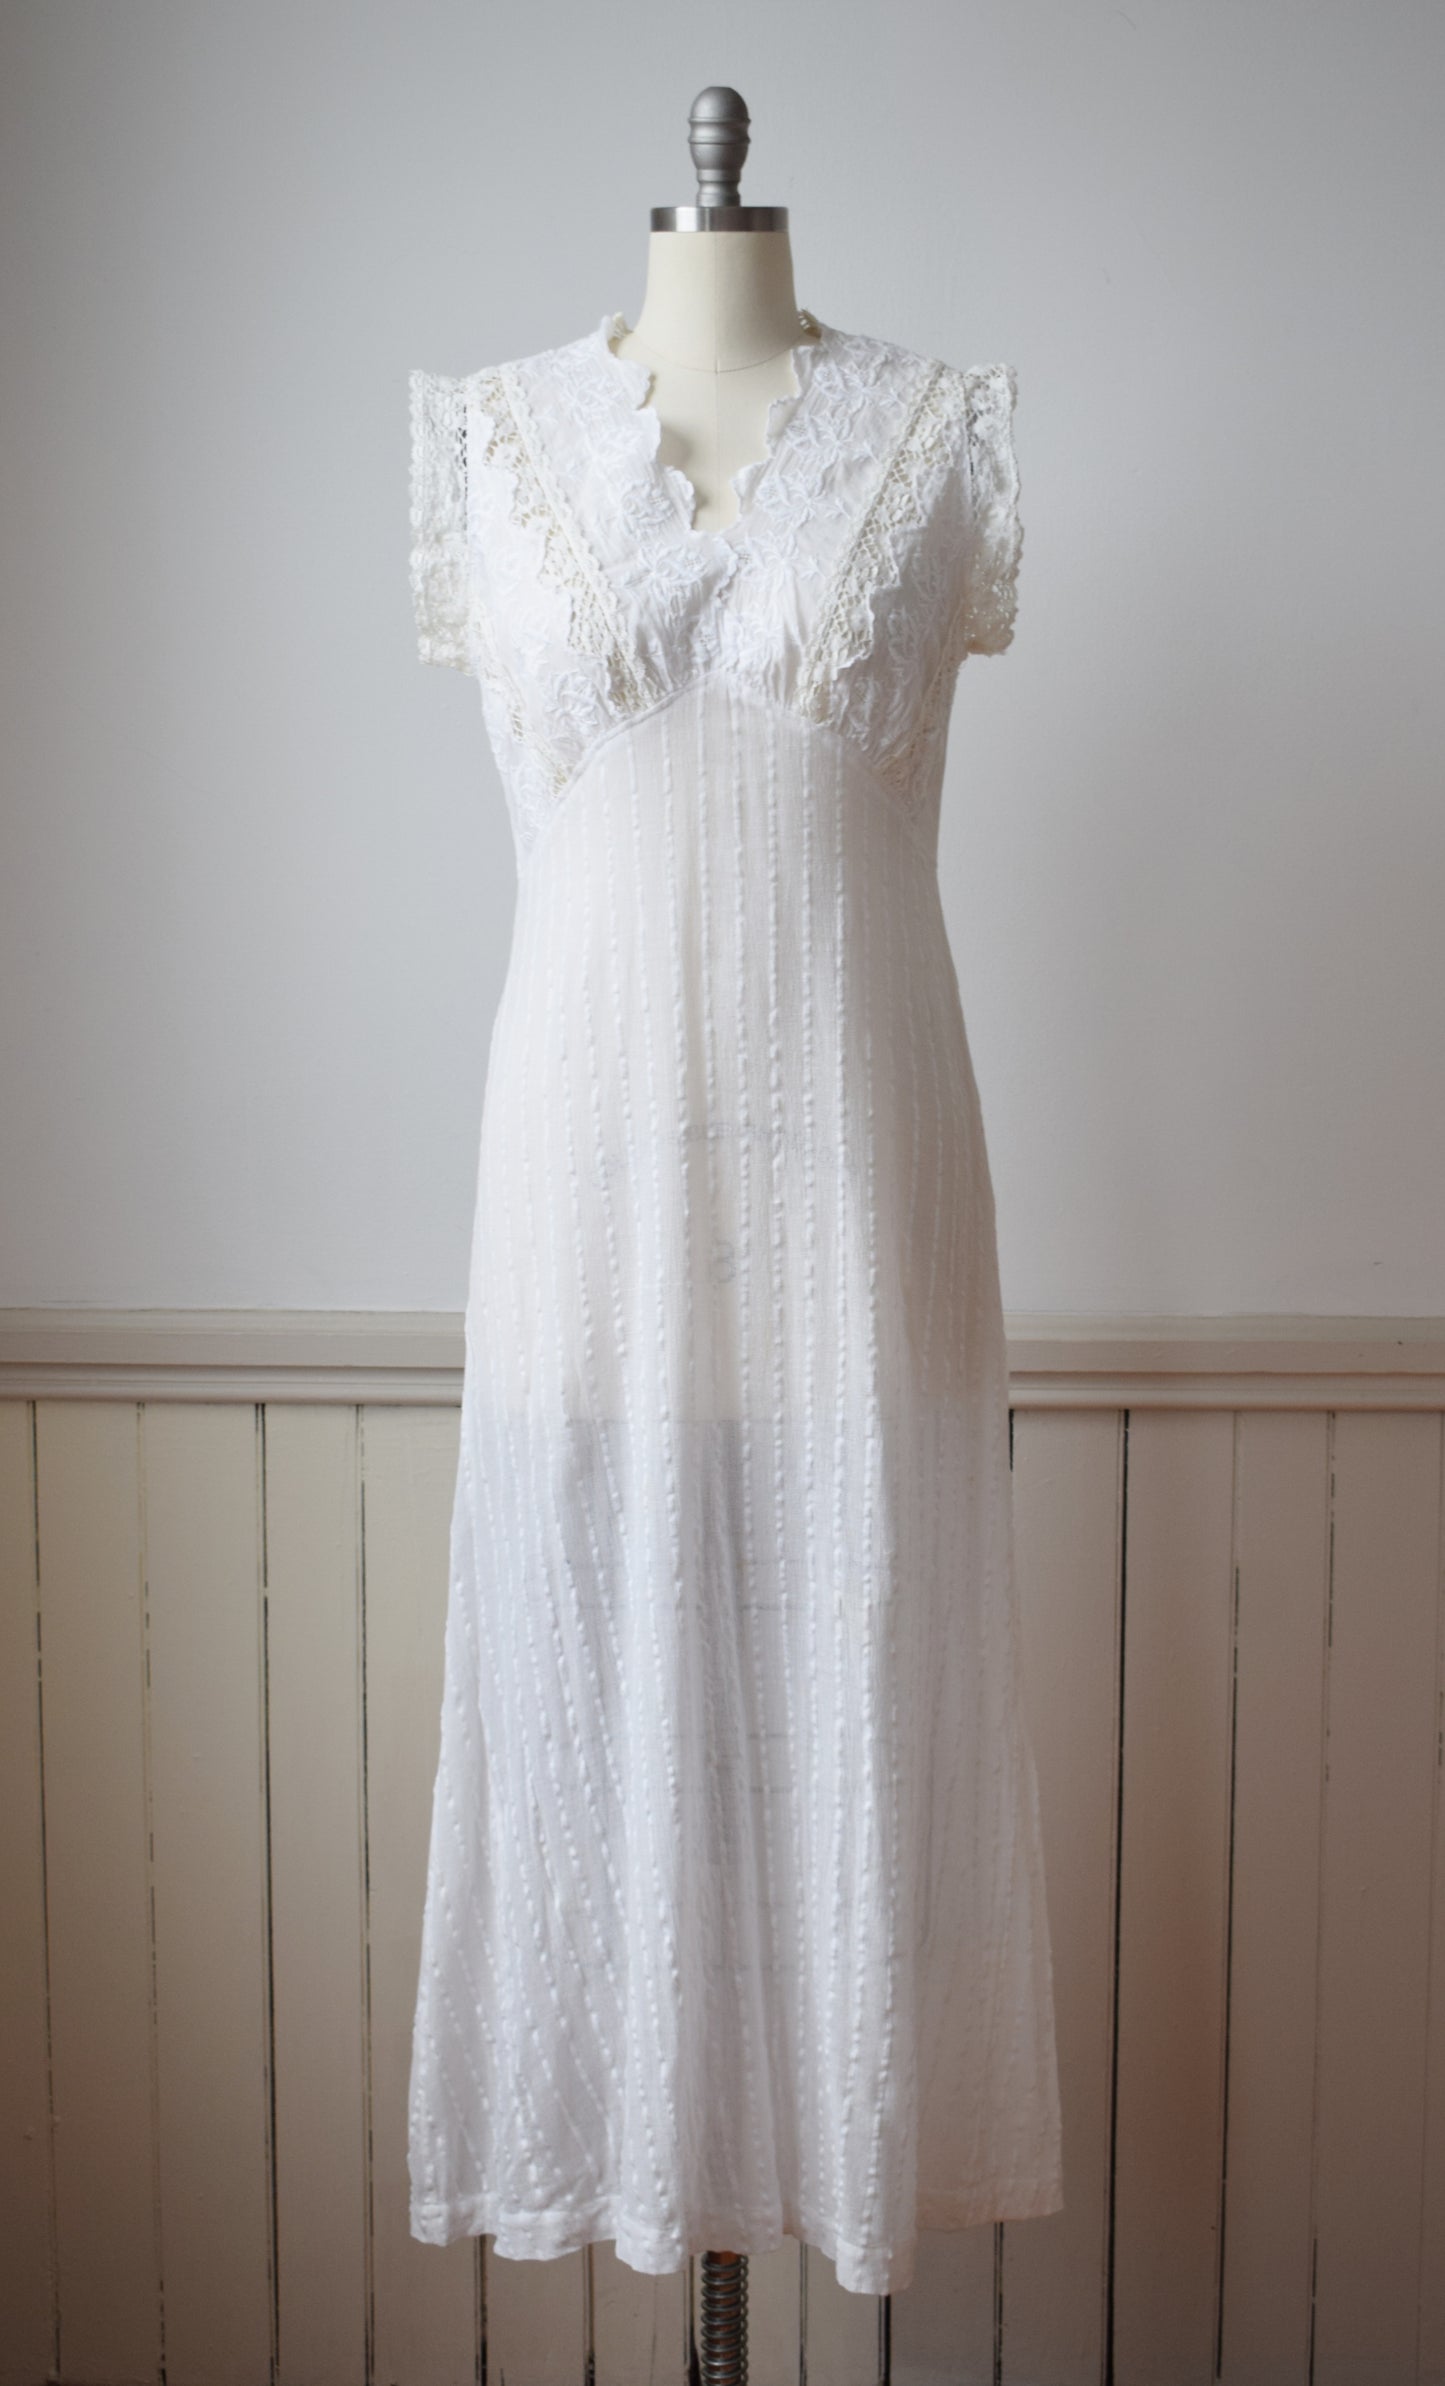 Antique Cotton and Lace Nightgown Dress | M/L